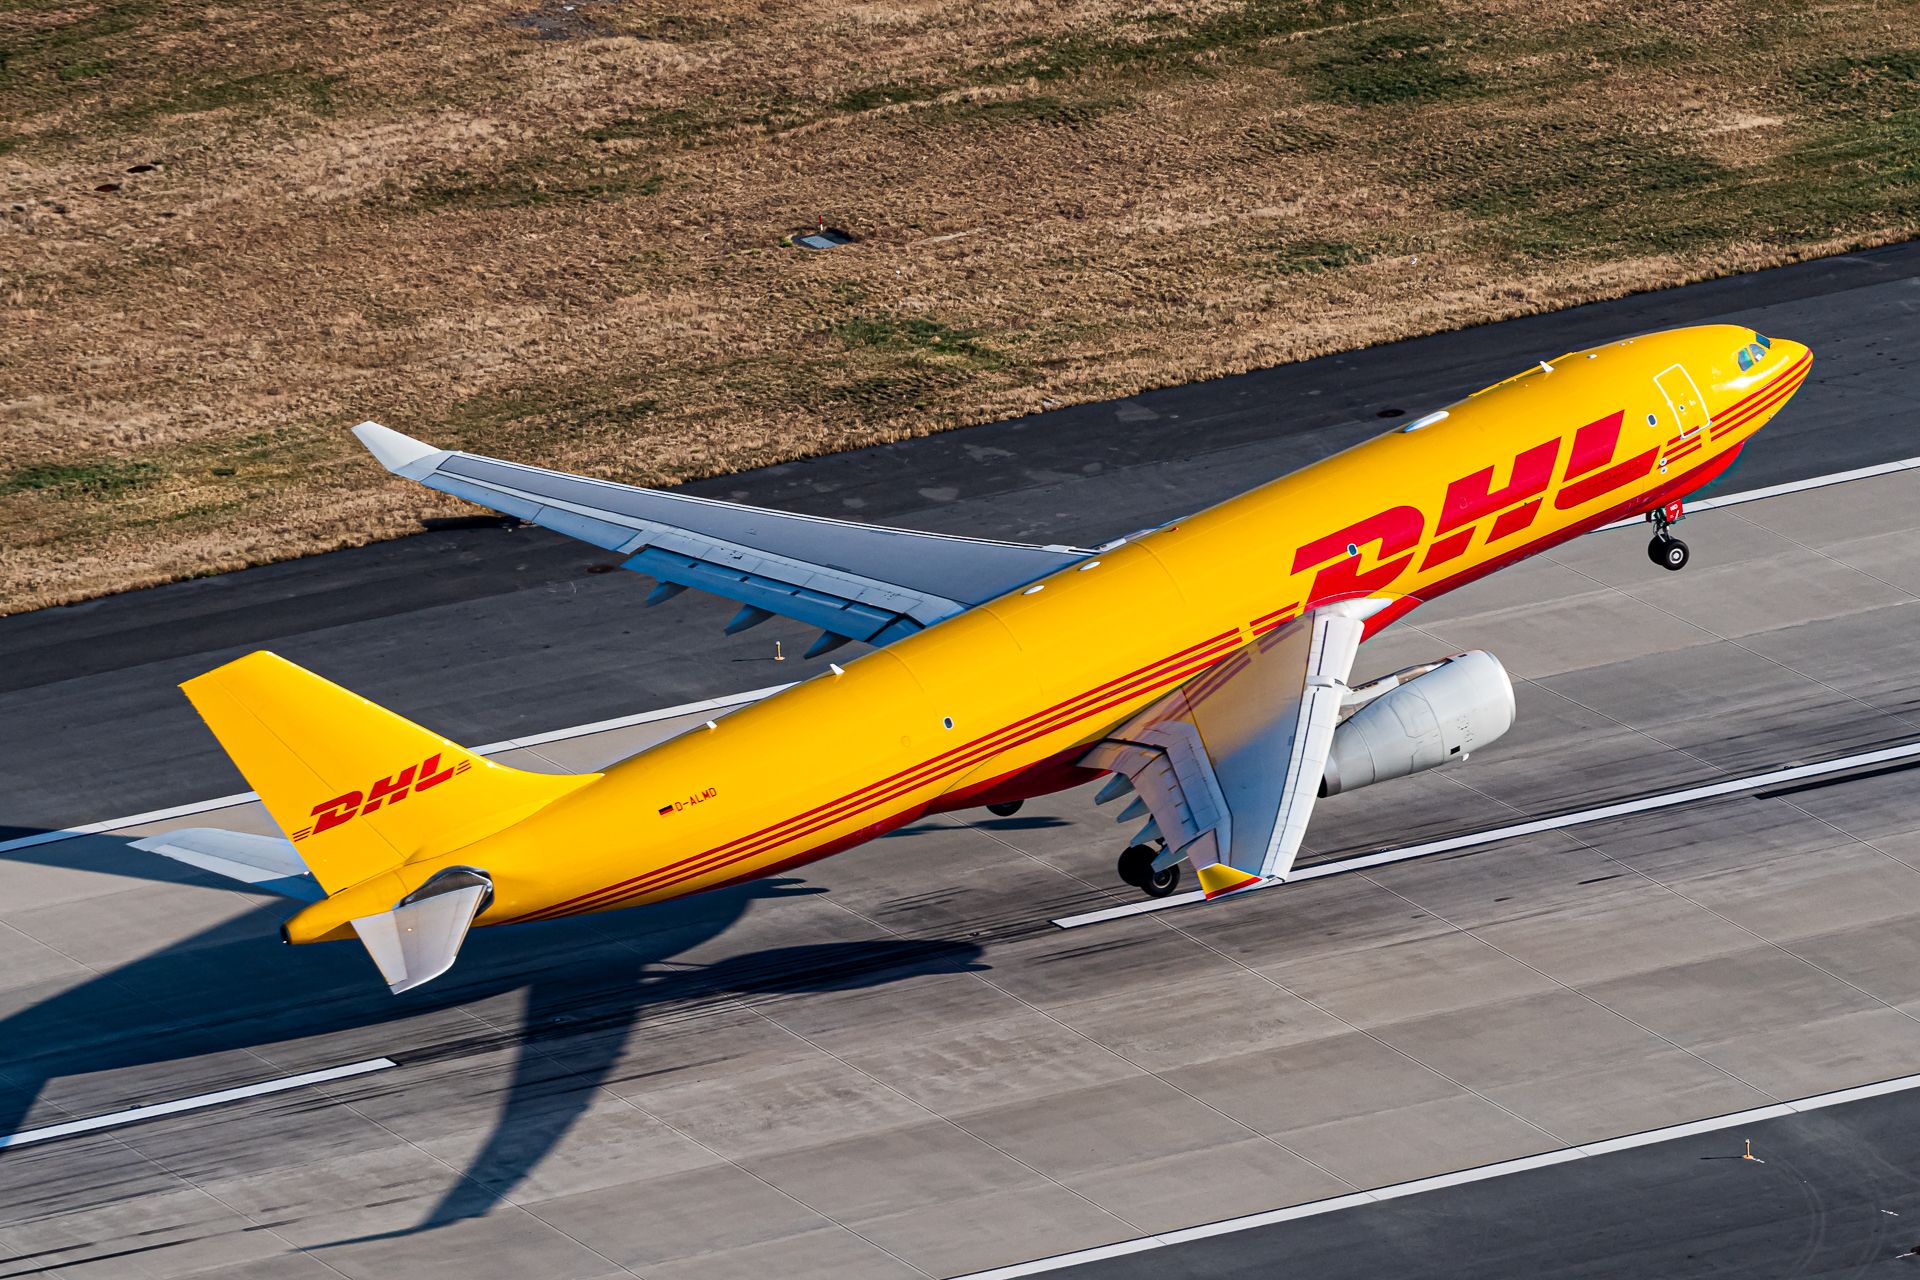 DHL Airbus A330 taking off from JFK